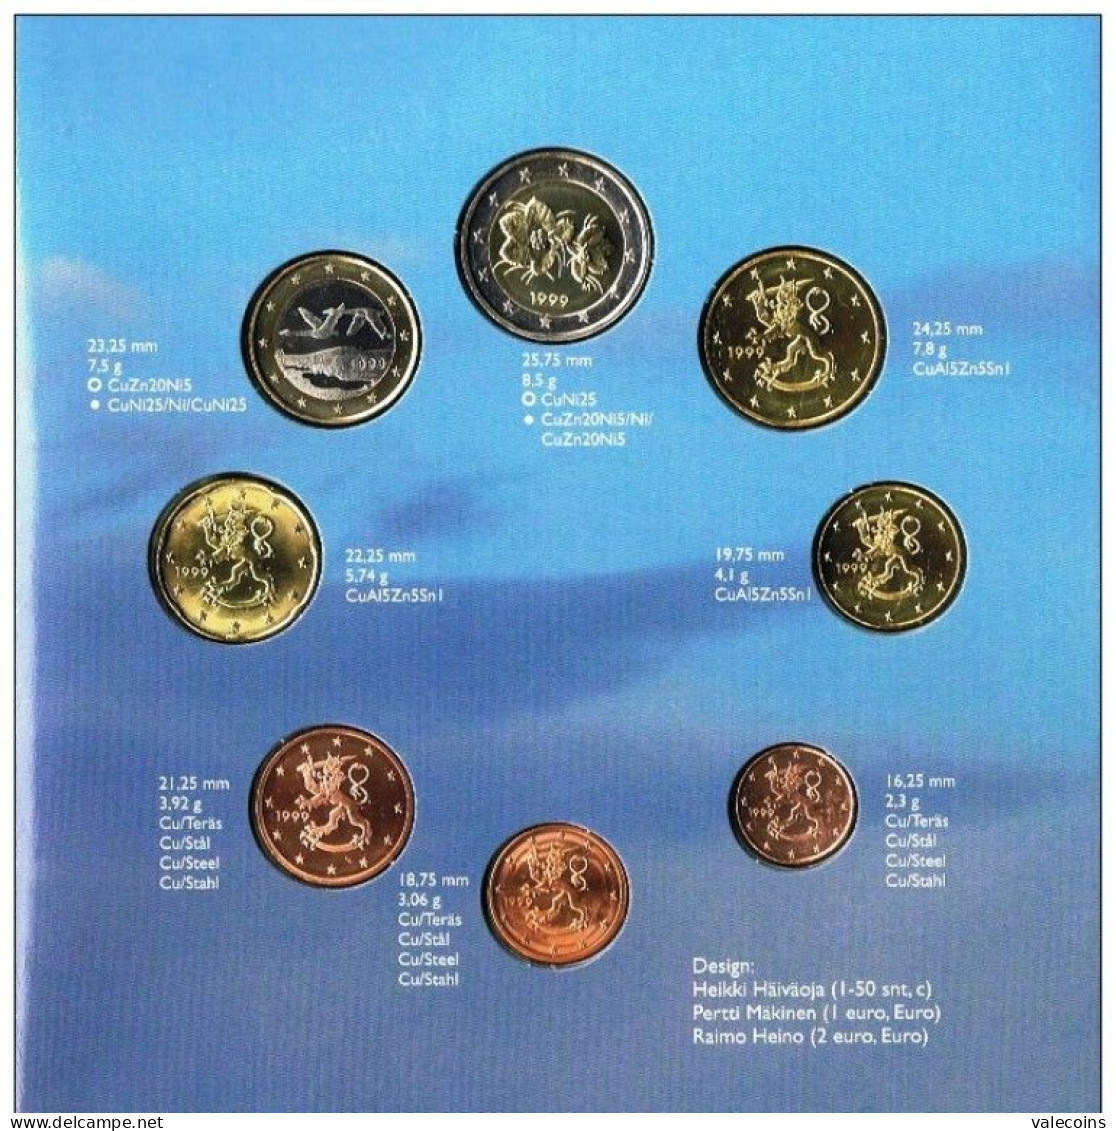 FINLANDIA SUOMI FINLAND FINNLAND - 24 COINS - KMS OFFICIAL ISSUE 1999-2000-2001 YEAR SET - LIMITED ISSUE - Finlandia